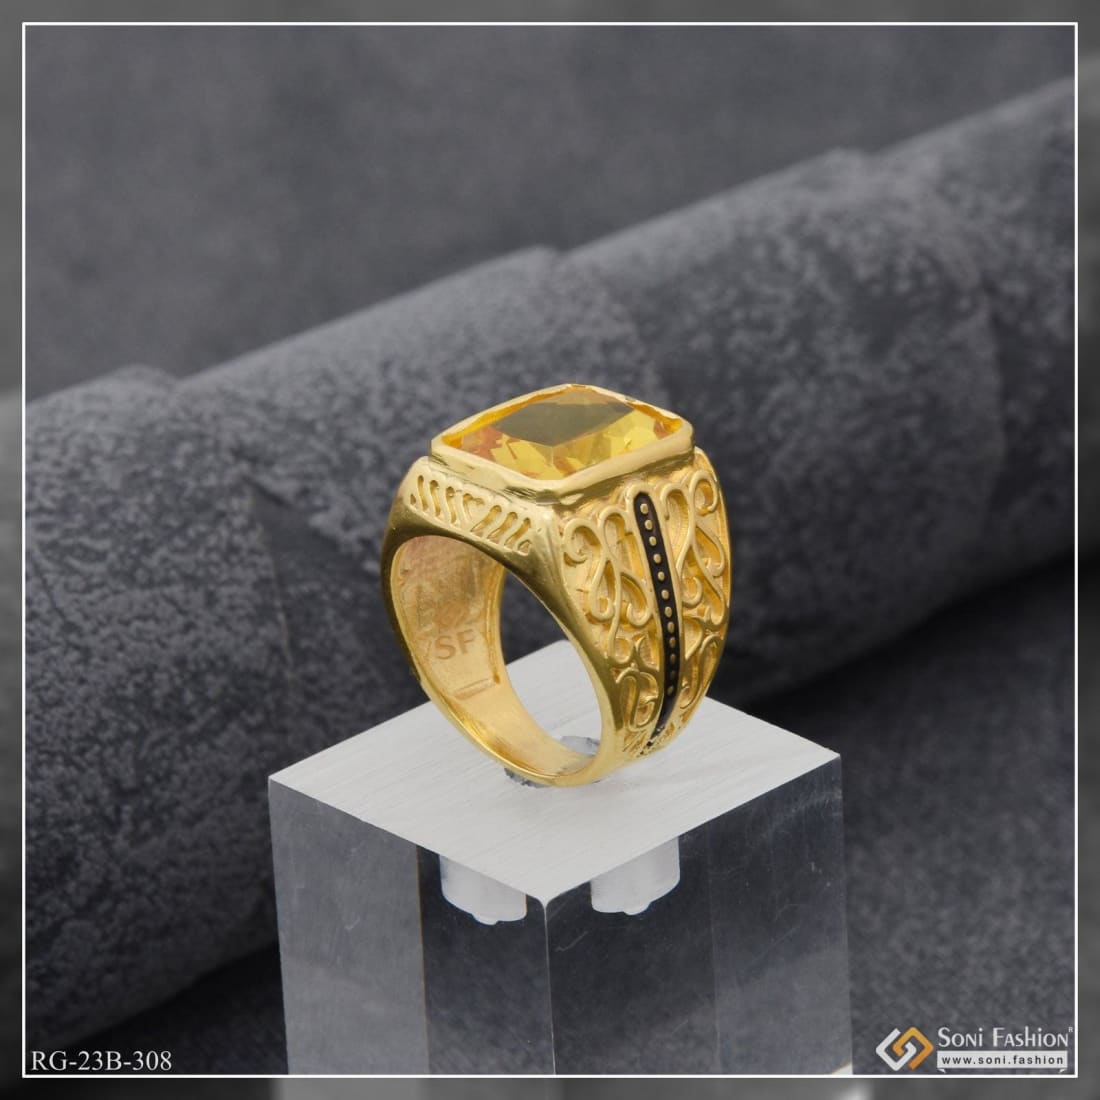 Buy BEEZAL Real Gold Rings Jewellery Designed for her with Cubic Zironica  Stone brilliant as Diamond (Weight: More than 1.20gms) | Wide Range of  Antique Traditional Gold Rings BIS Certified at Amazon.in